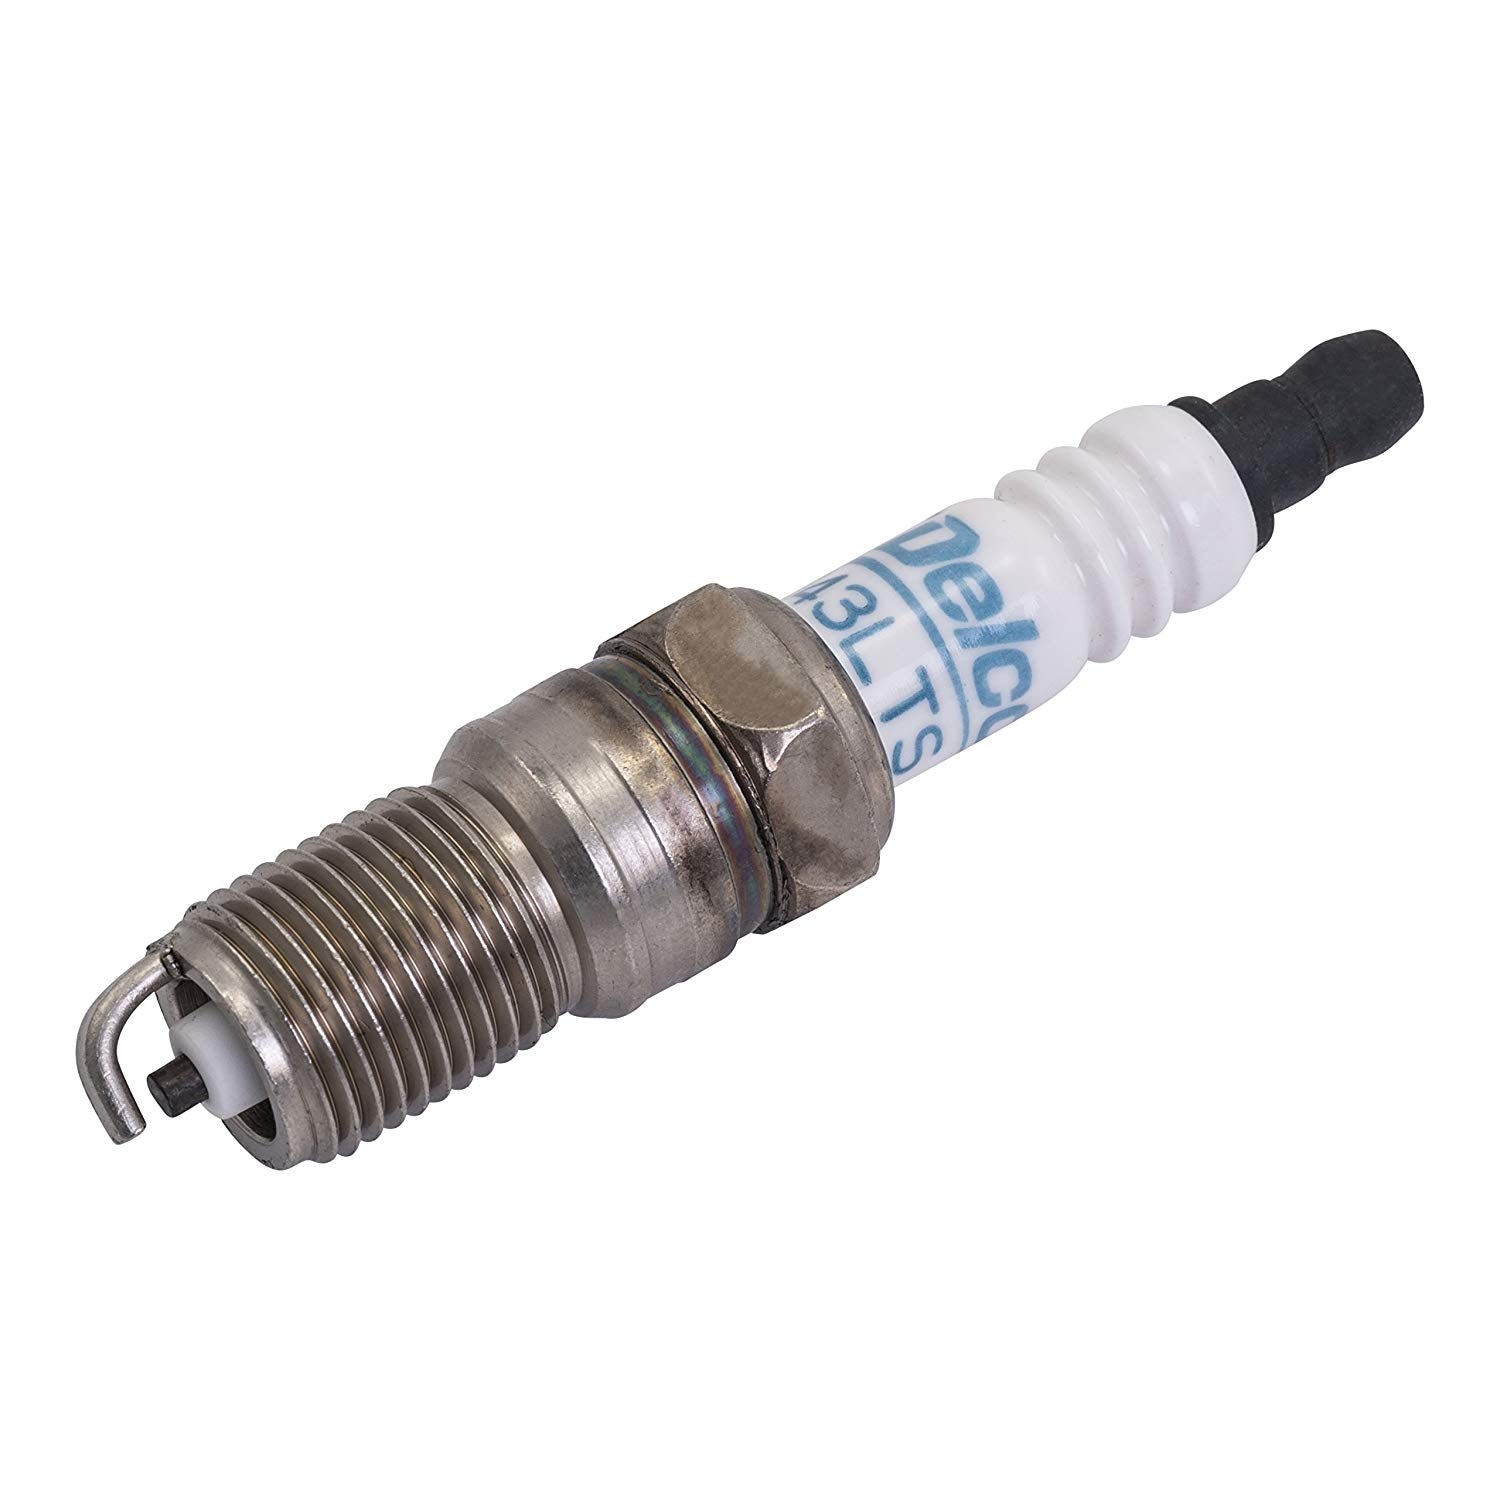 AC Delco Spark Plug 4 Pack - MR43LTS